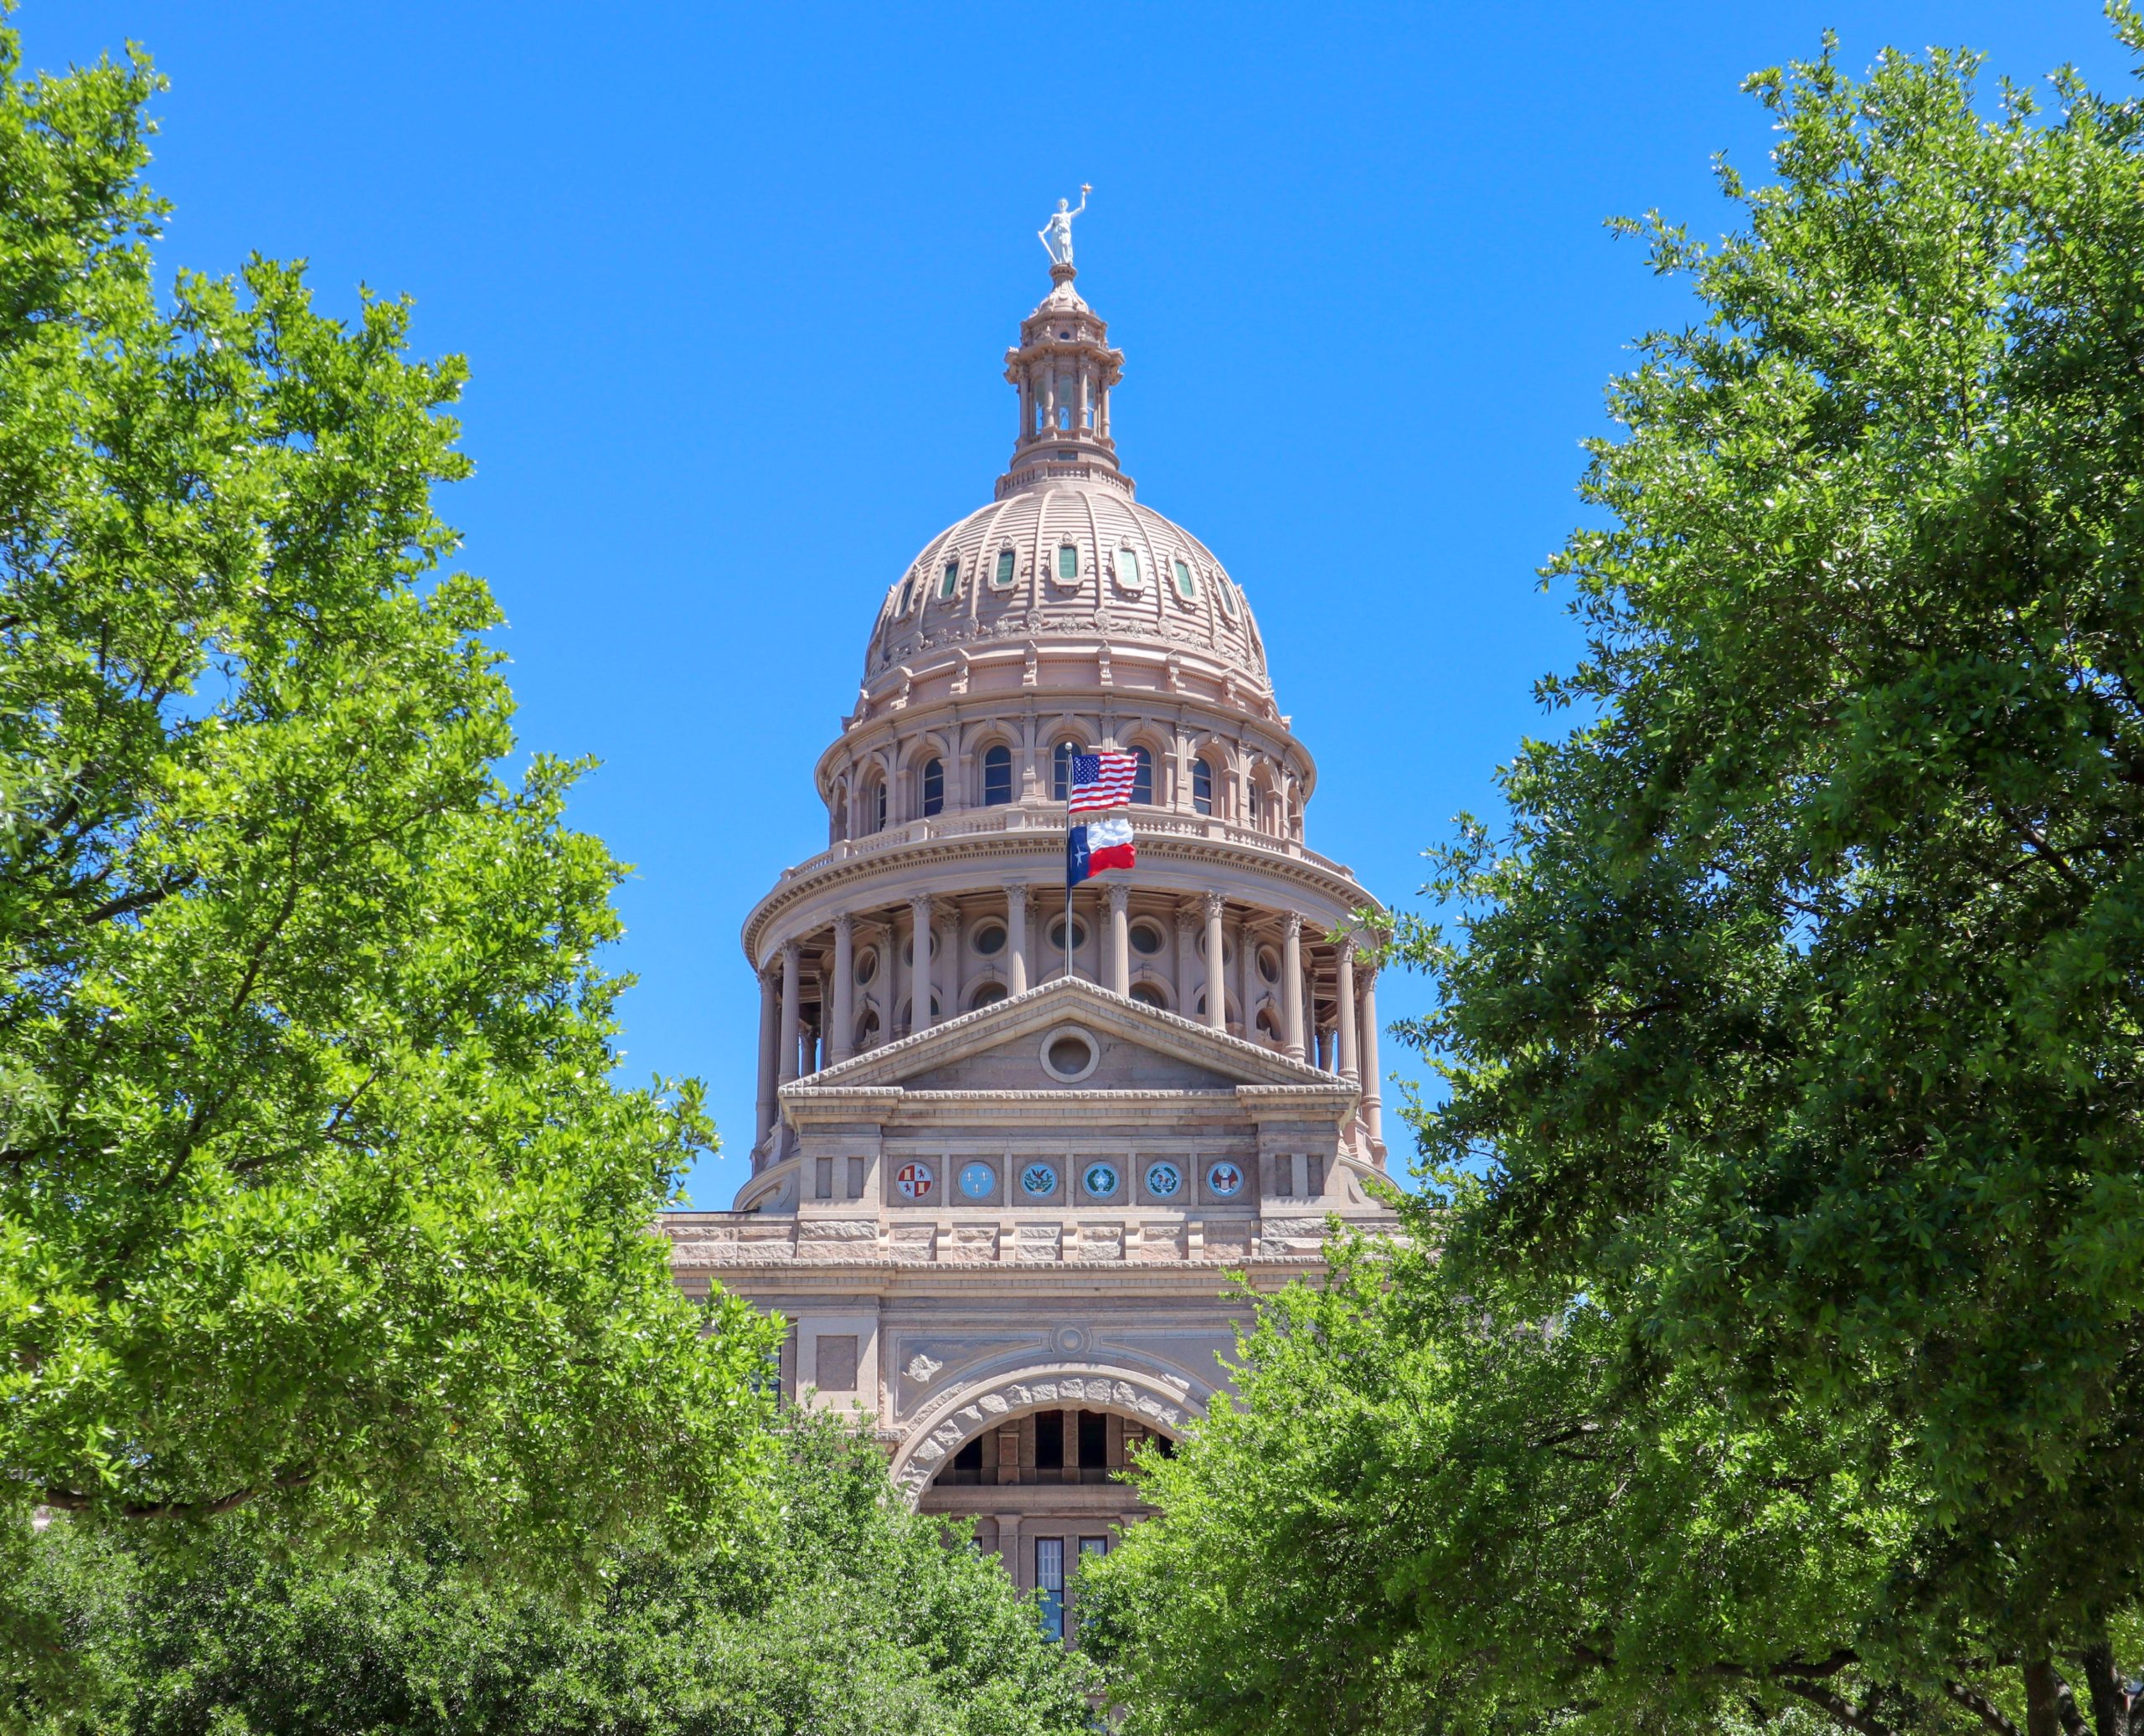 Human Coalition Action Applauds Supreme Court’s Principled Rulings on Texas Heartbeat Act